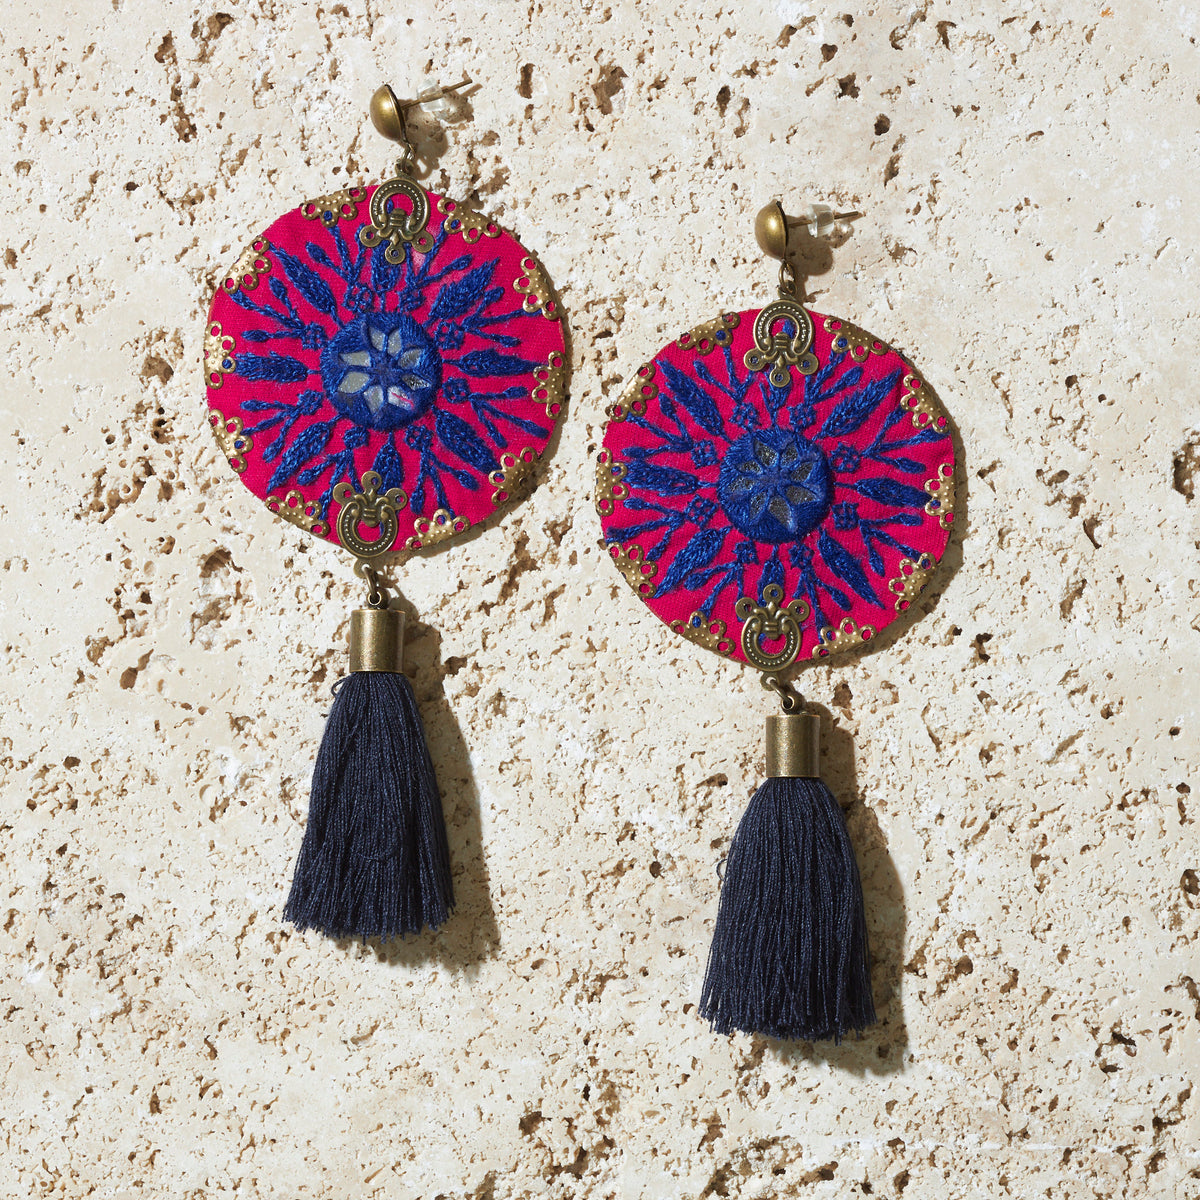 Bohemian hand made magenta and blue earrings. Hand embroidered mirror works earrings